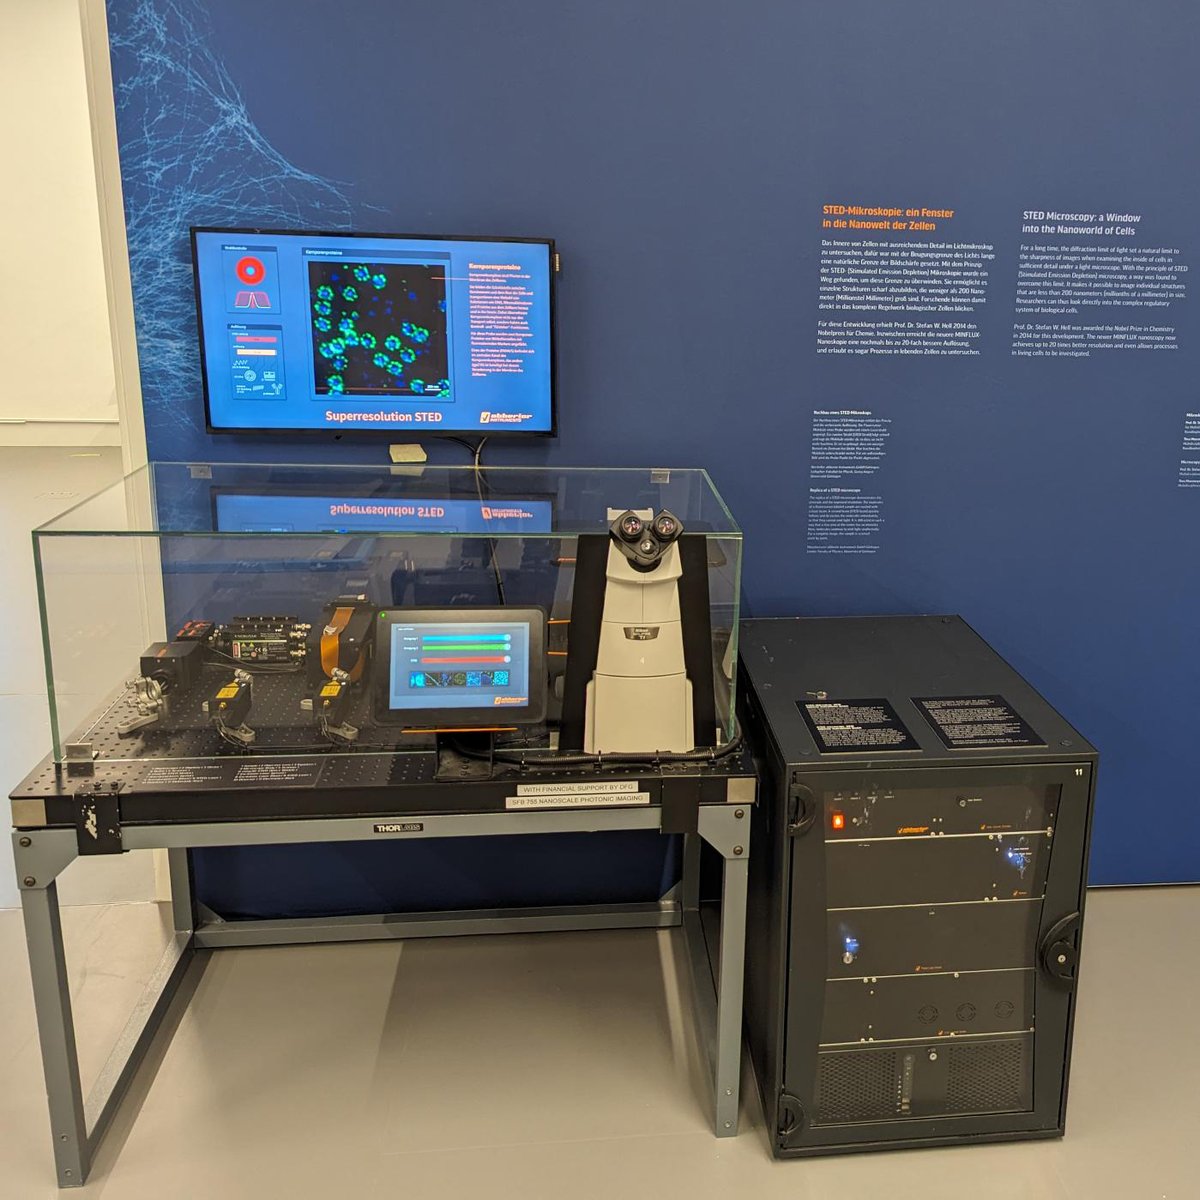 Ever wanted to know how a #superresolution microscope works inside? You now have the chance to peek inside at #ForumWissen science museum in #Goettingen: a glass case abberior STED microscope will be part of the exhibition “Herz & Hirn — gemeinsam verstehen” opened today!